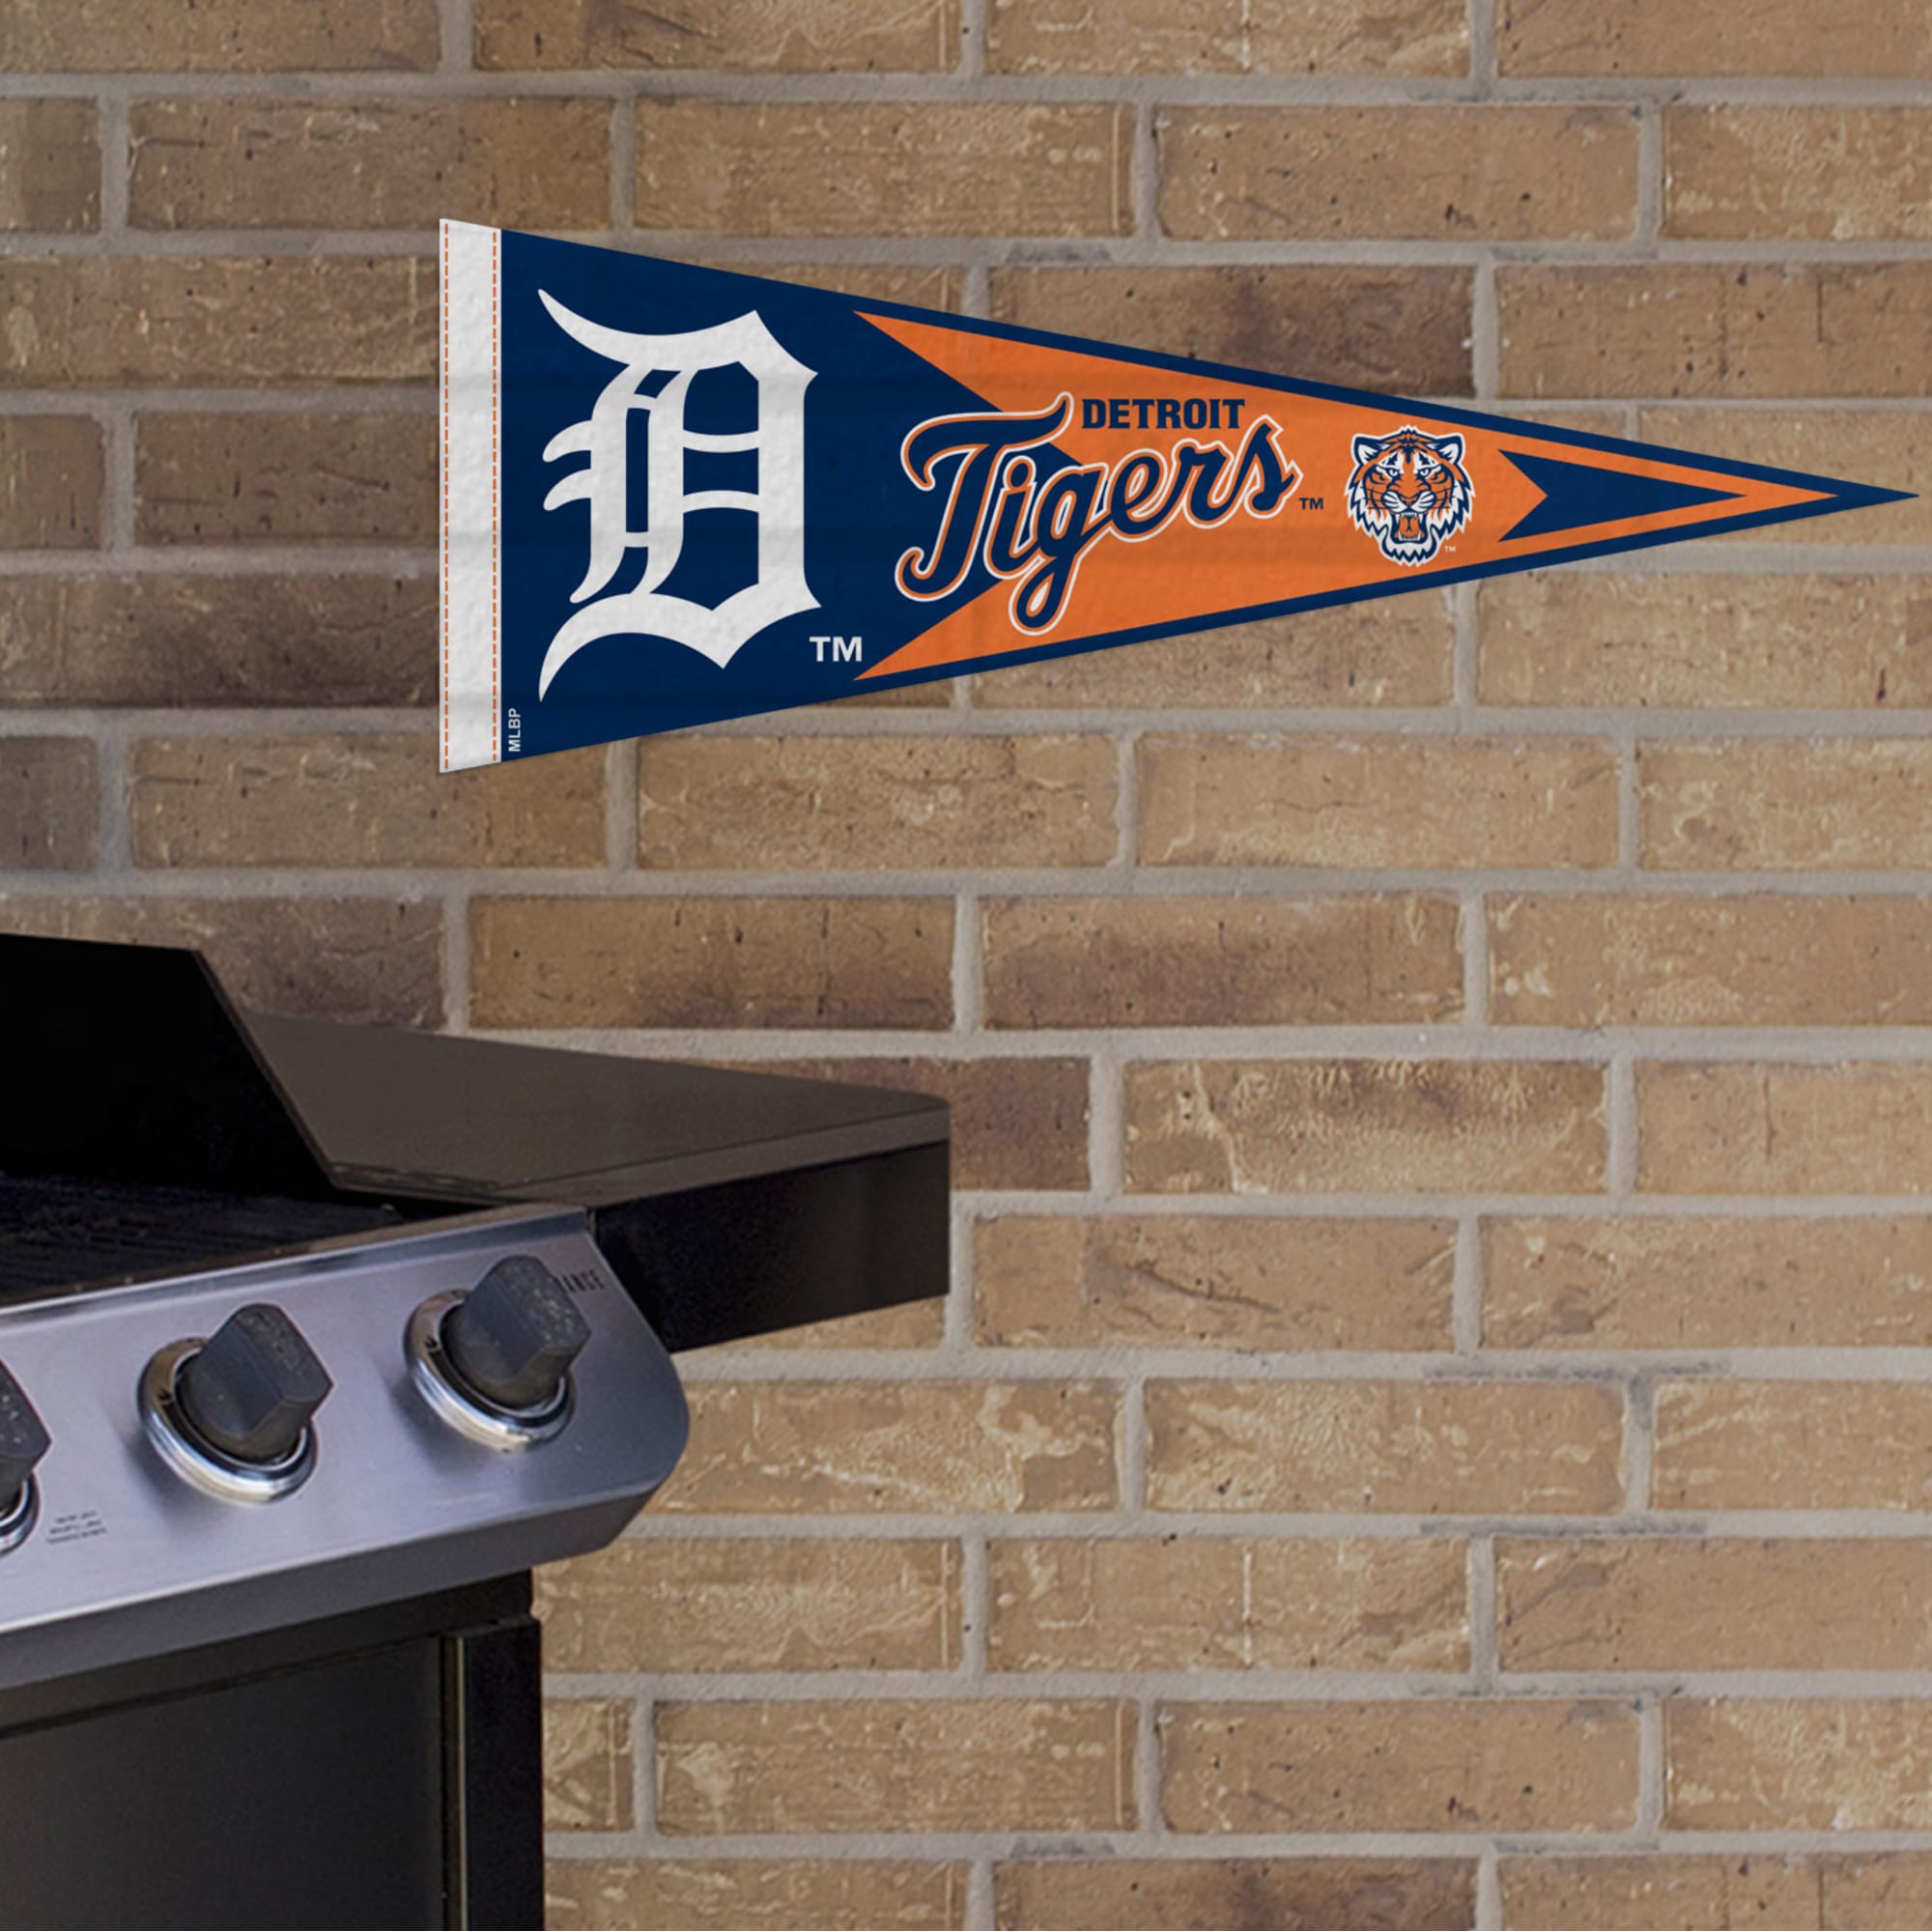 Detroit Tigers: Pennant - Officially Licensed MLB Outdoor Graphic 24.0"W x 9.0"H by Fathead | Wood/Aluminum